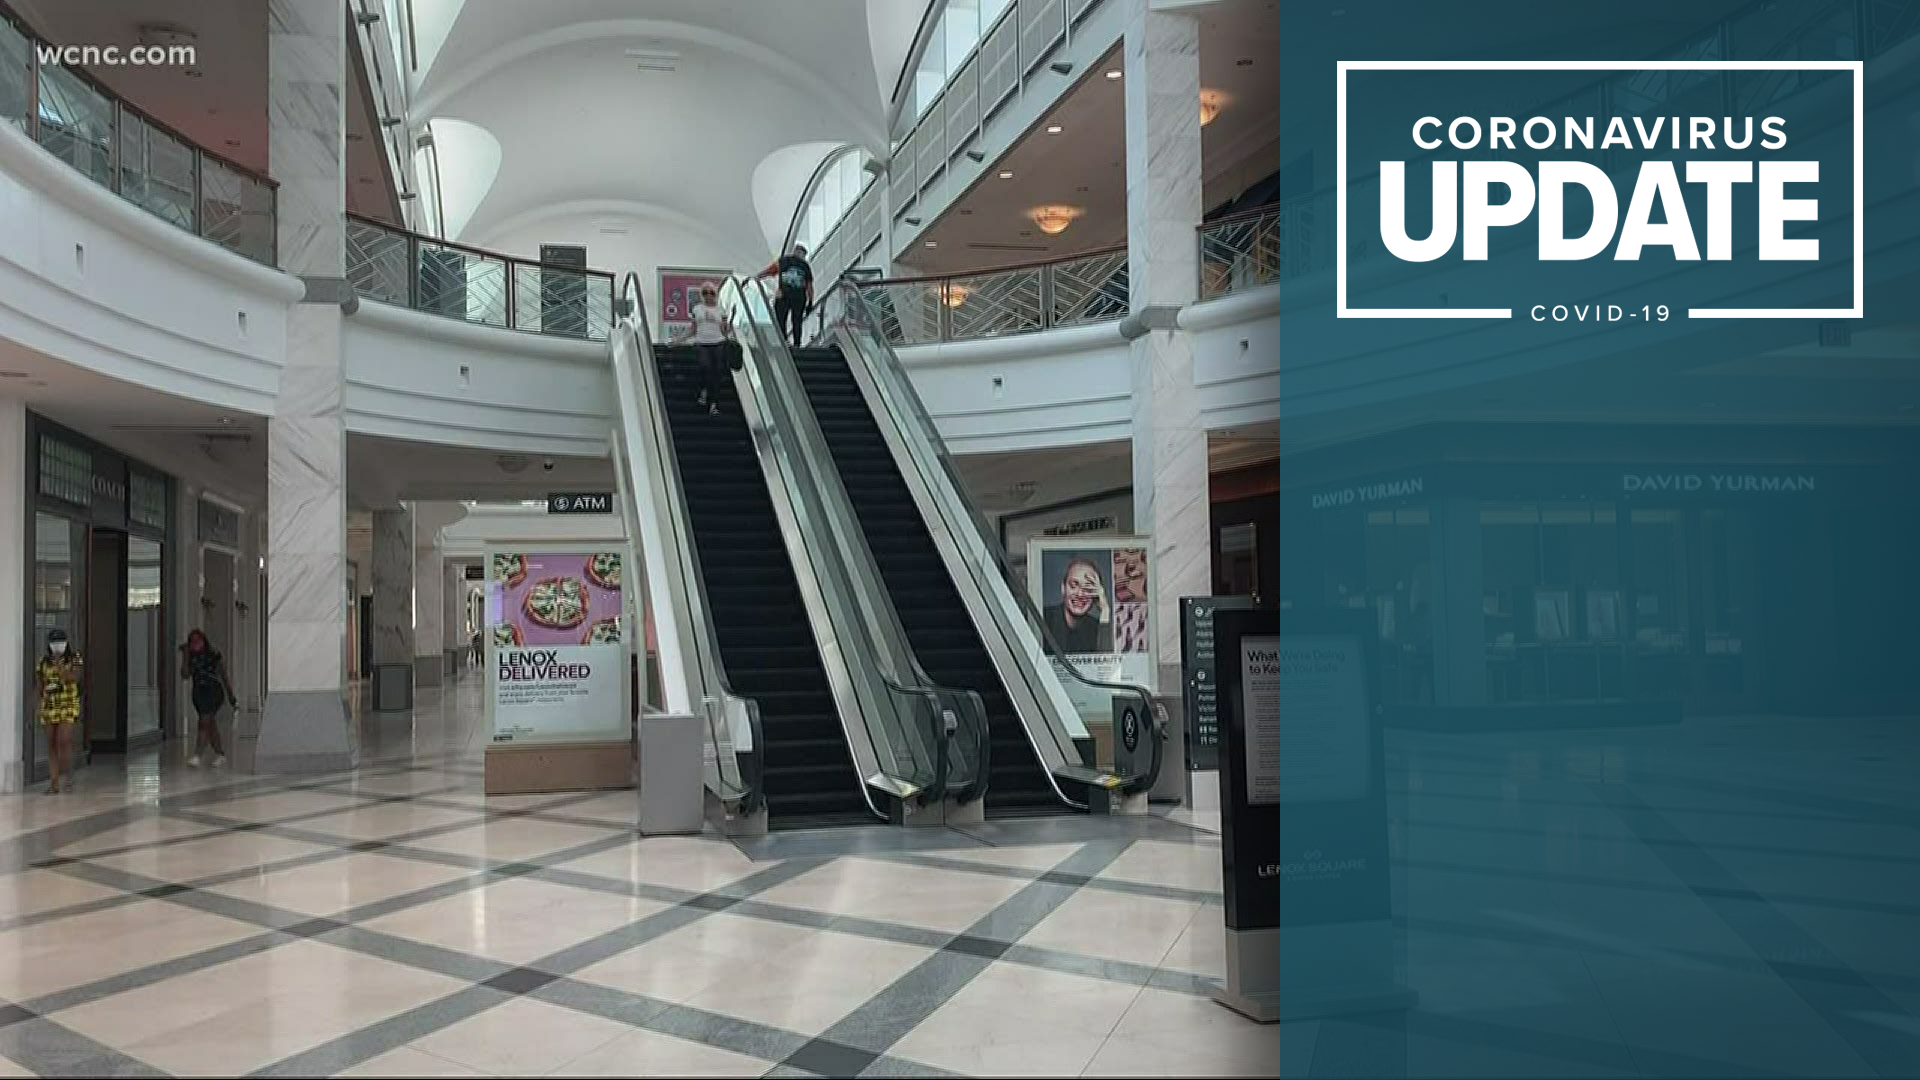 SouthPark Mall retail shops open for business, May 12, 2020